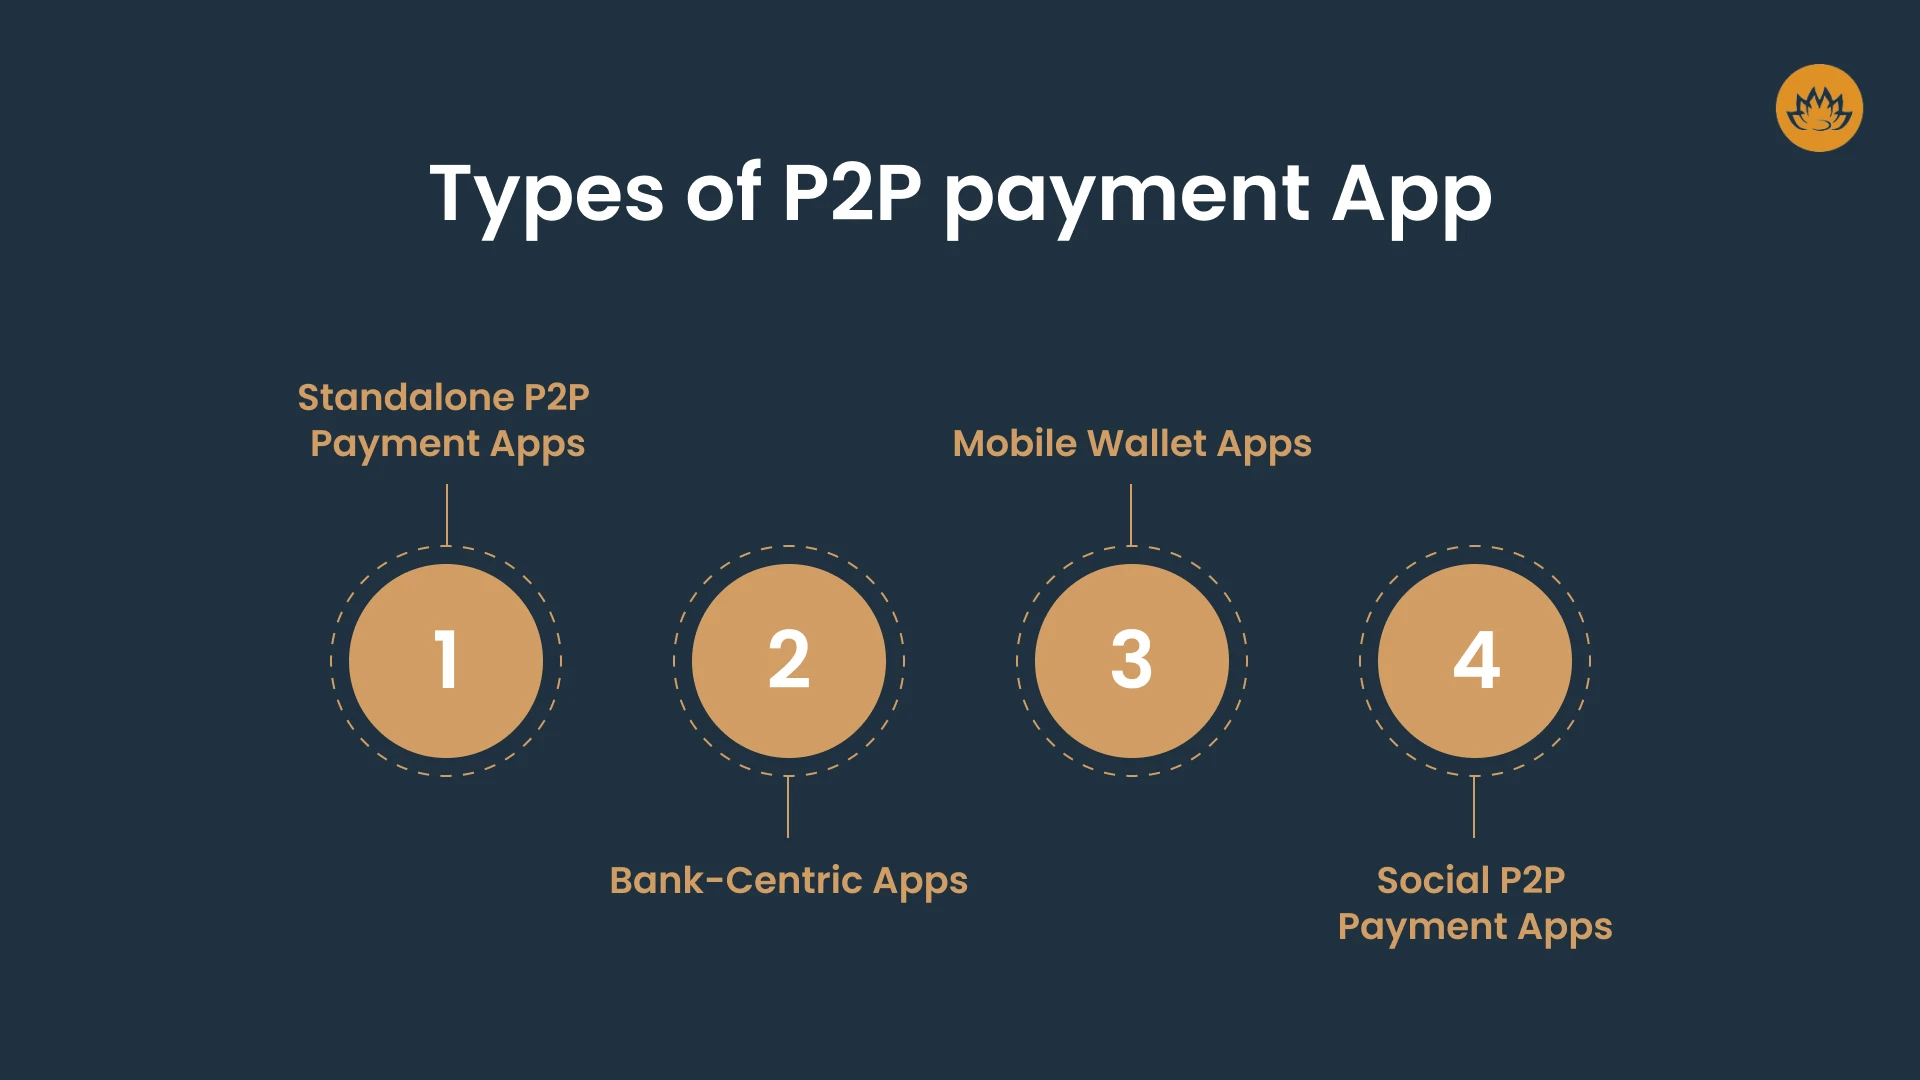 Types of P2P payment App